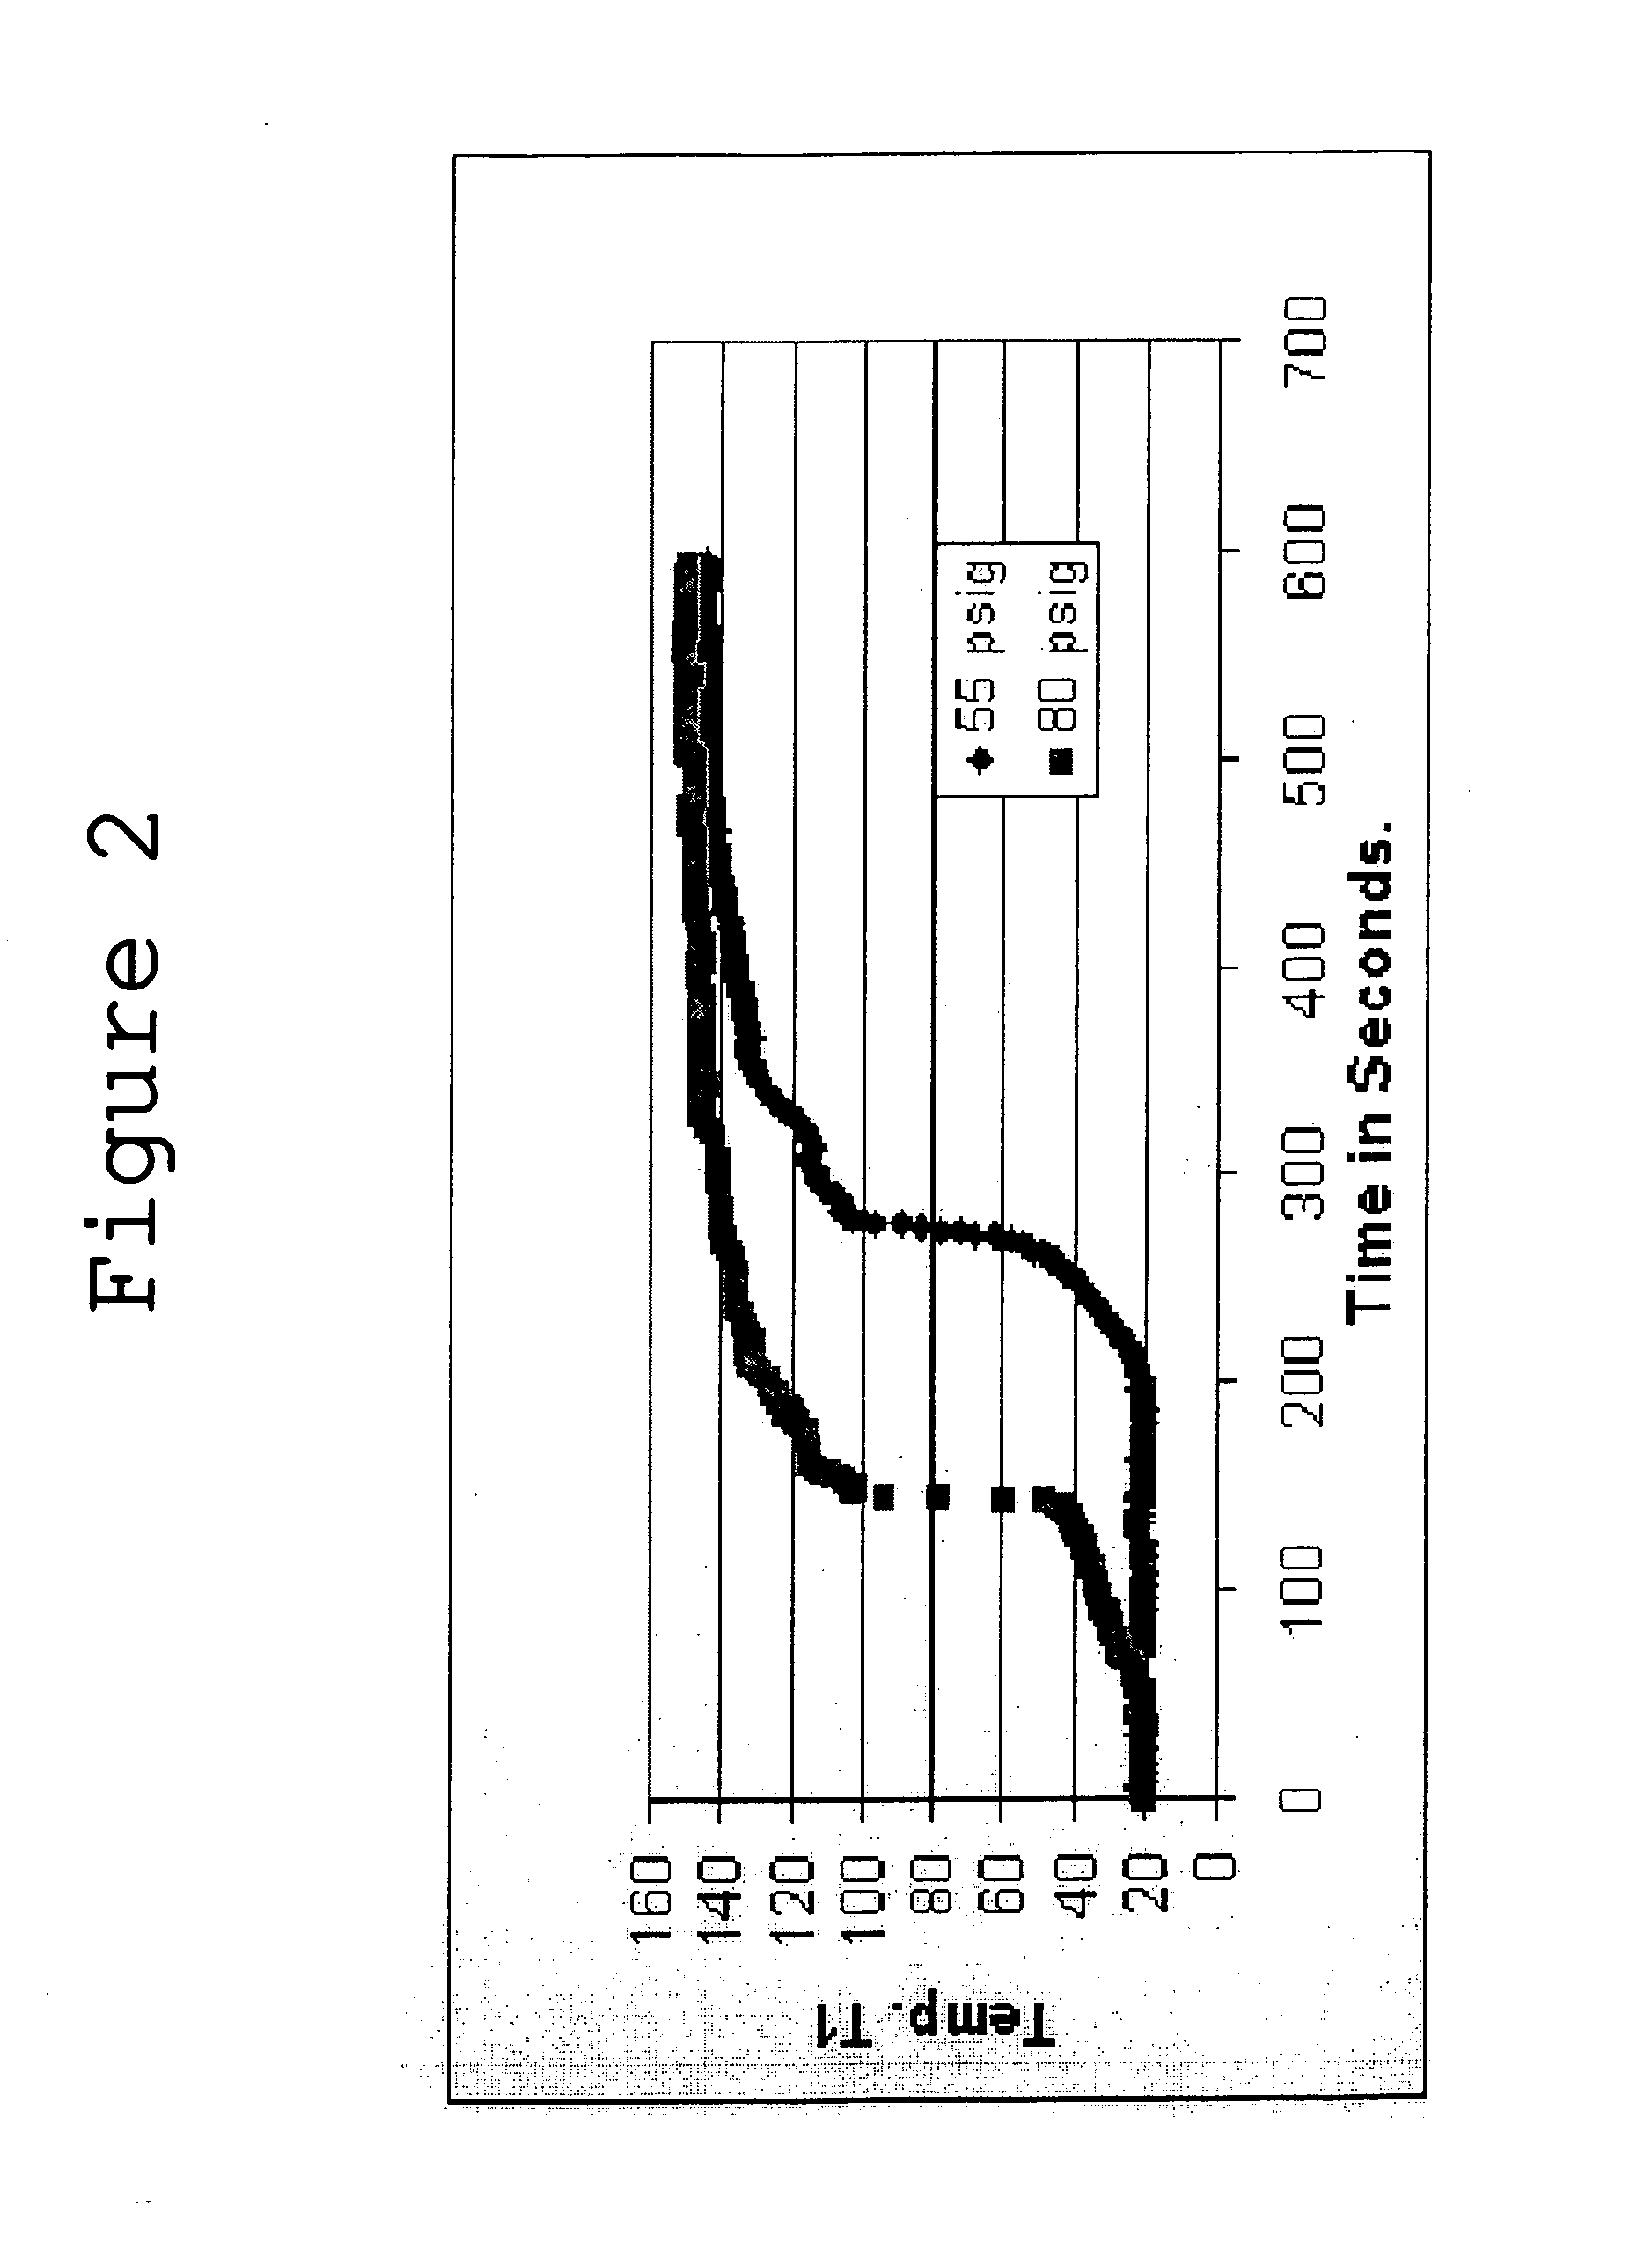 Hydrogen generation catalysts and systems for hydrogen generation